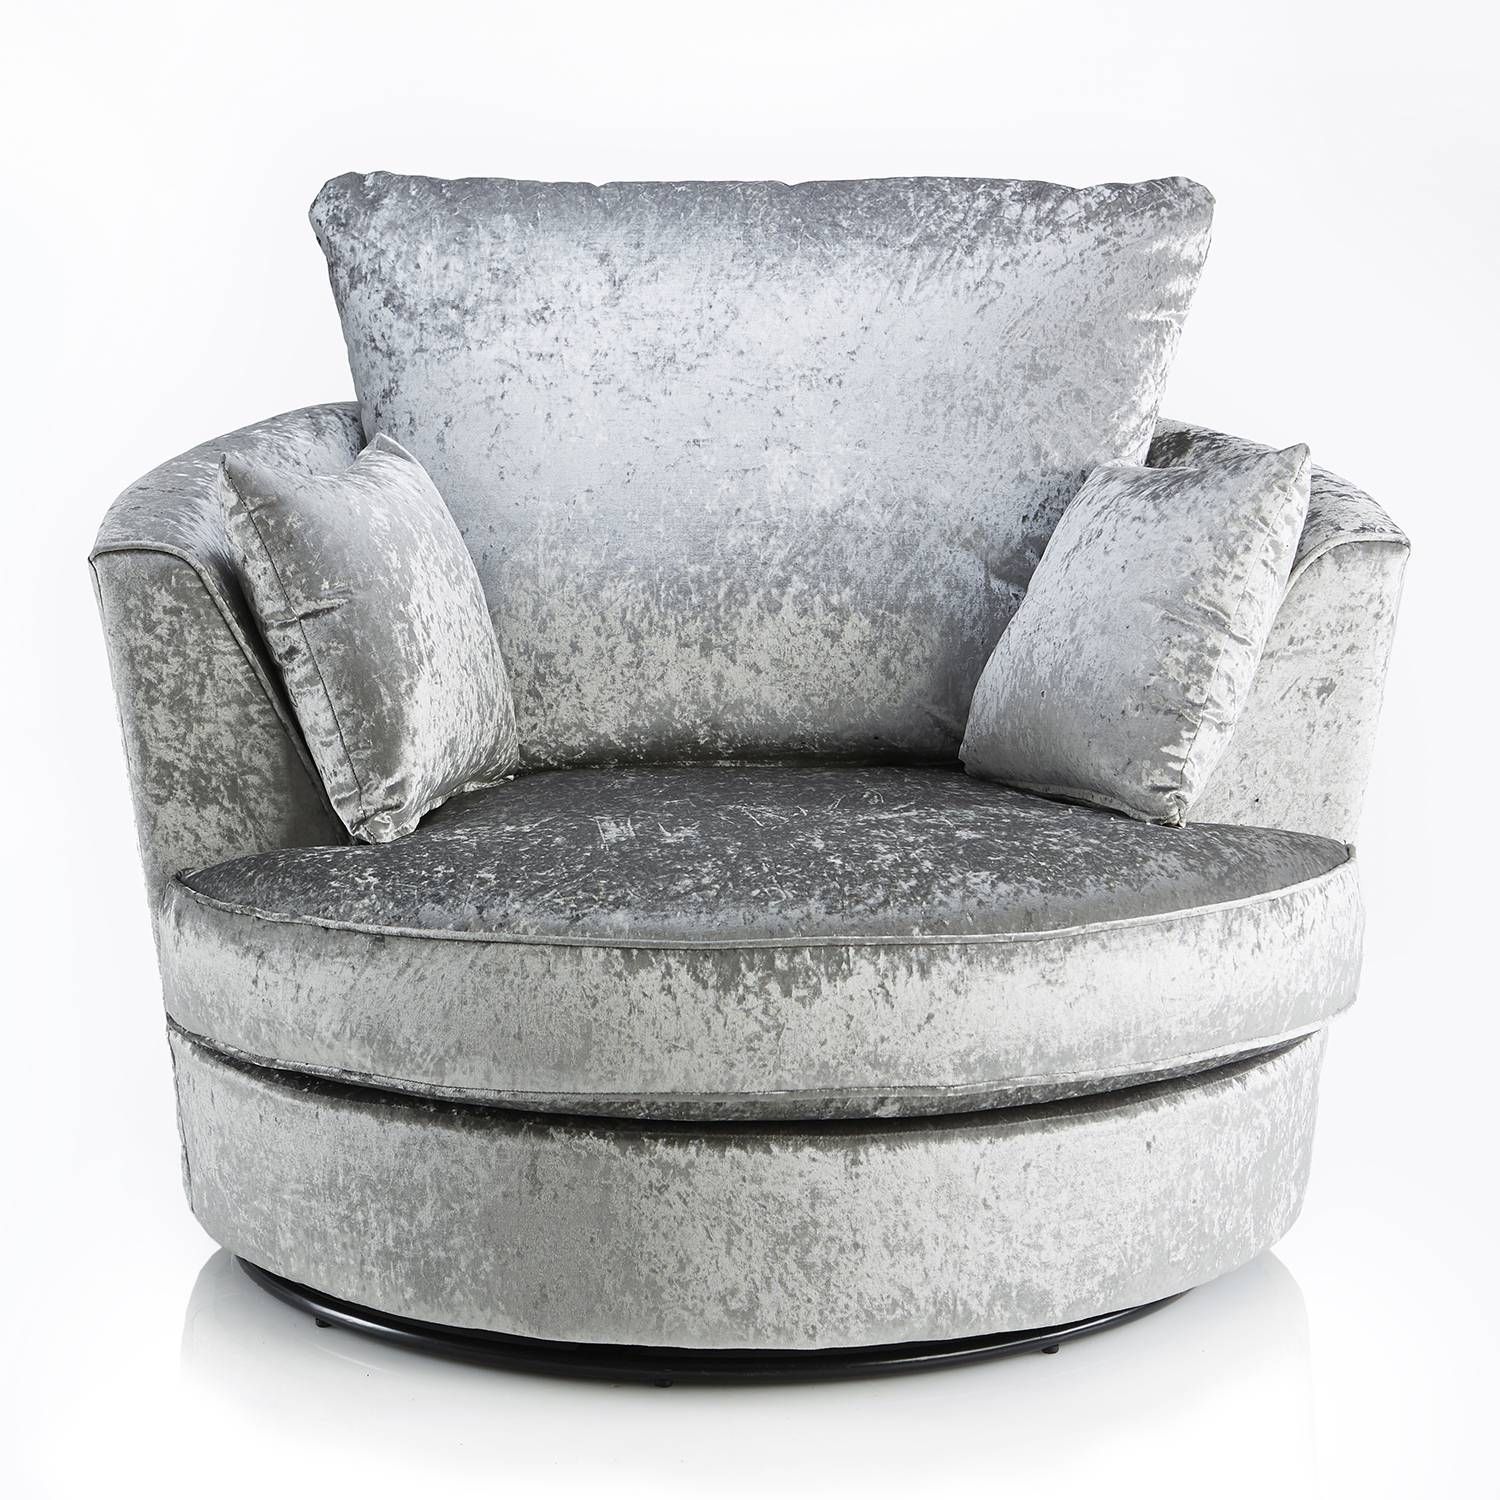 Crushed Velvet Furniture | Sofas, Beds, Chairs, Cushions With Regard To Corner Sofa And Swivel Chairs (View 26 of 30)